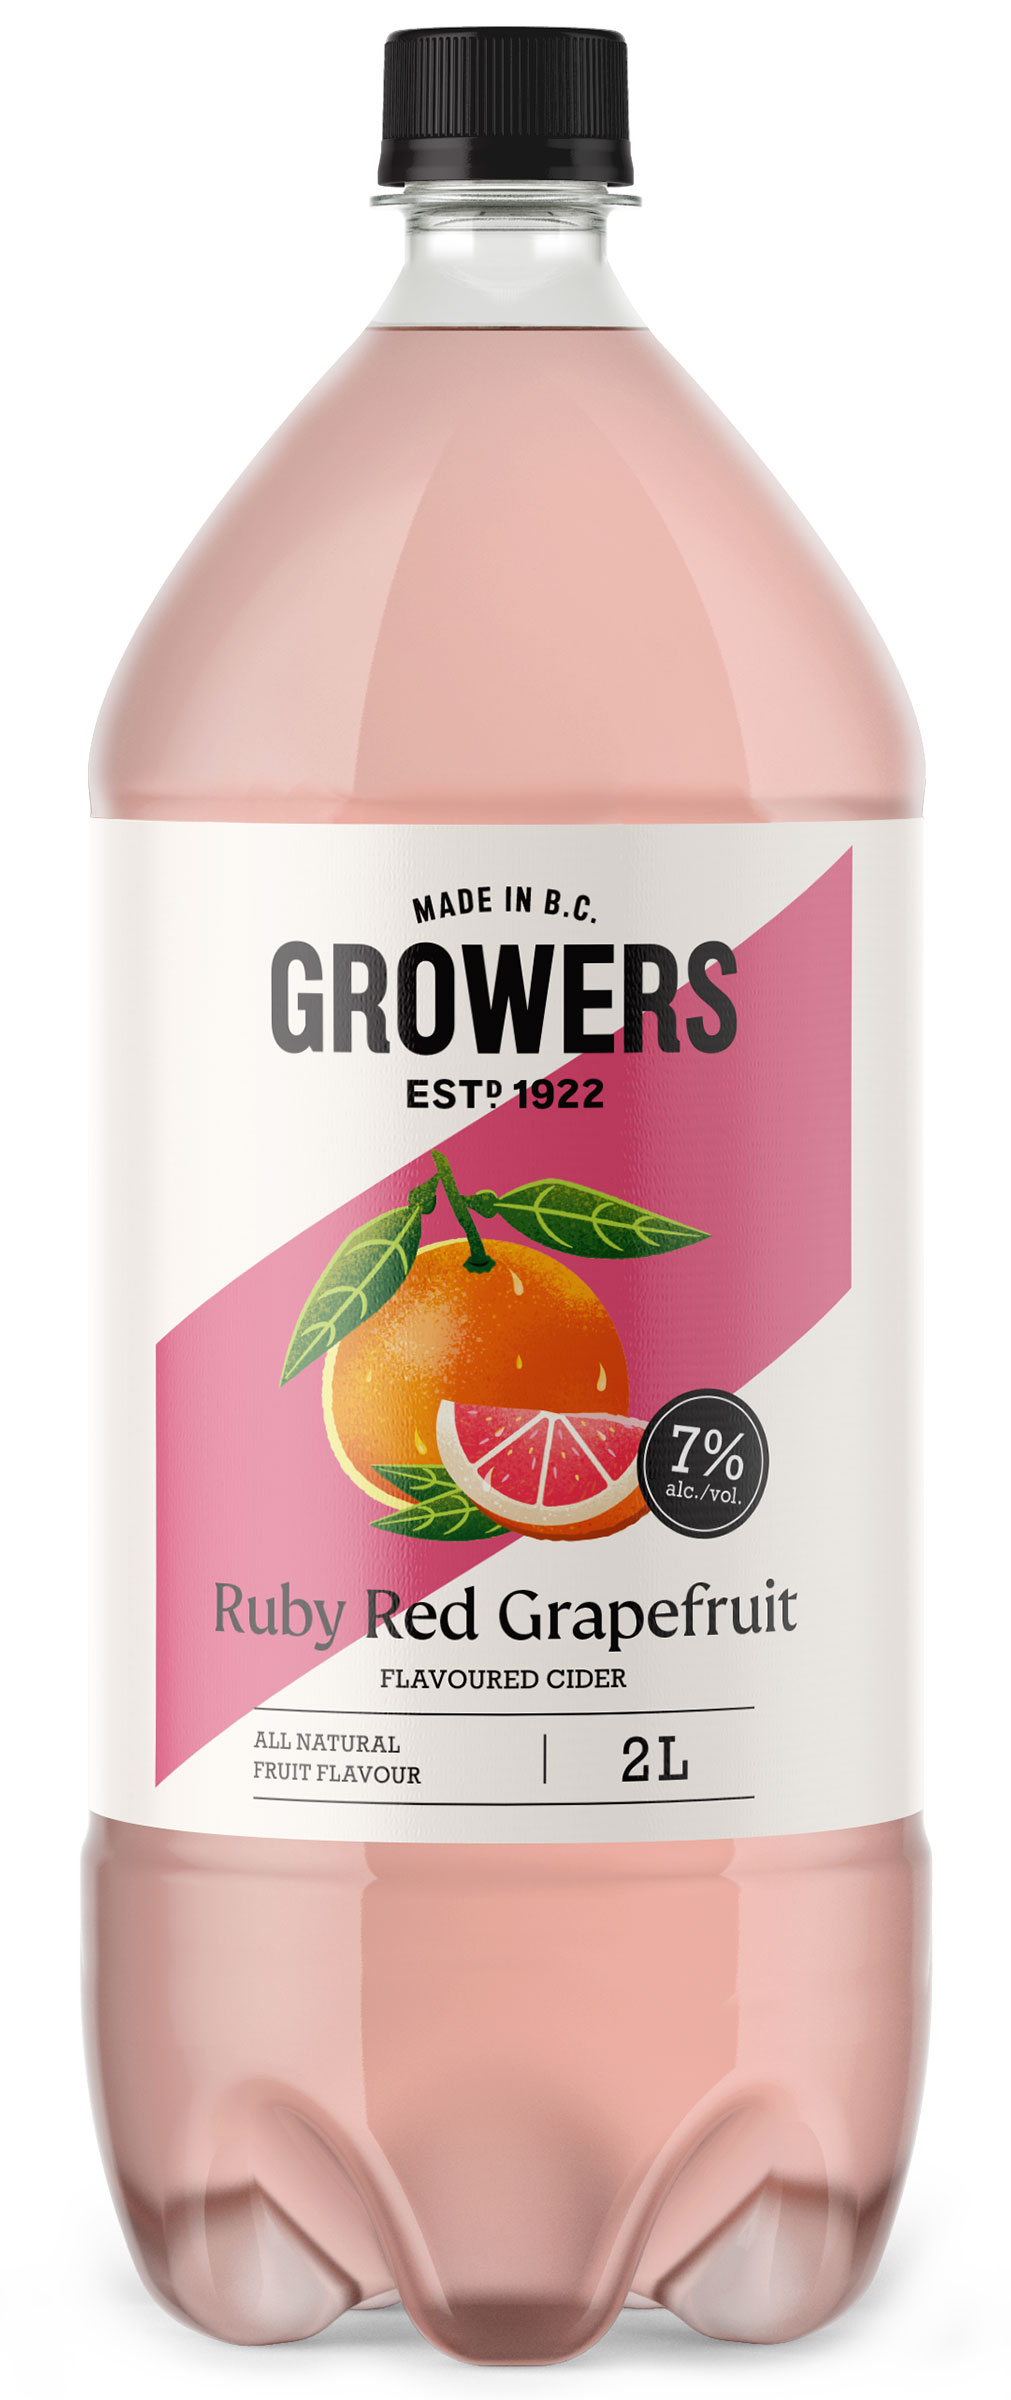 Bottle of Growers Ruby Red Grapefruit cider